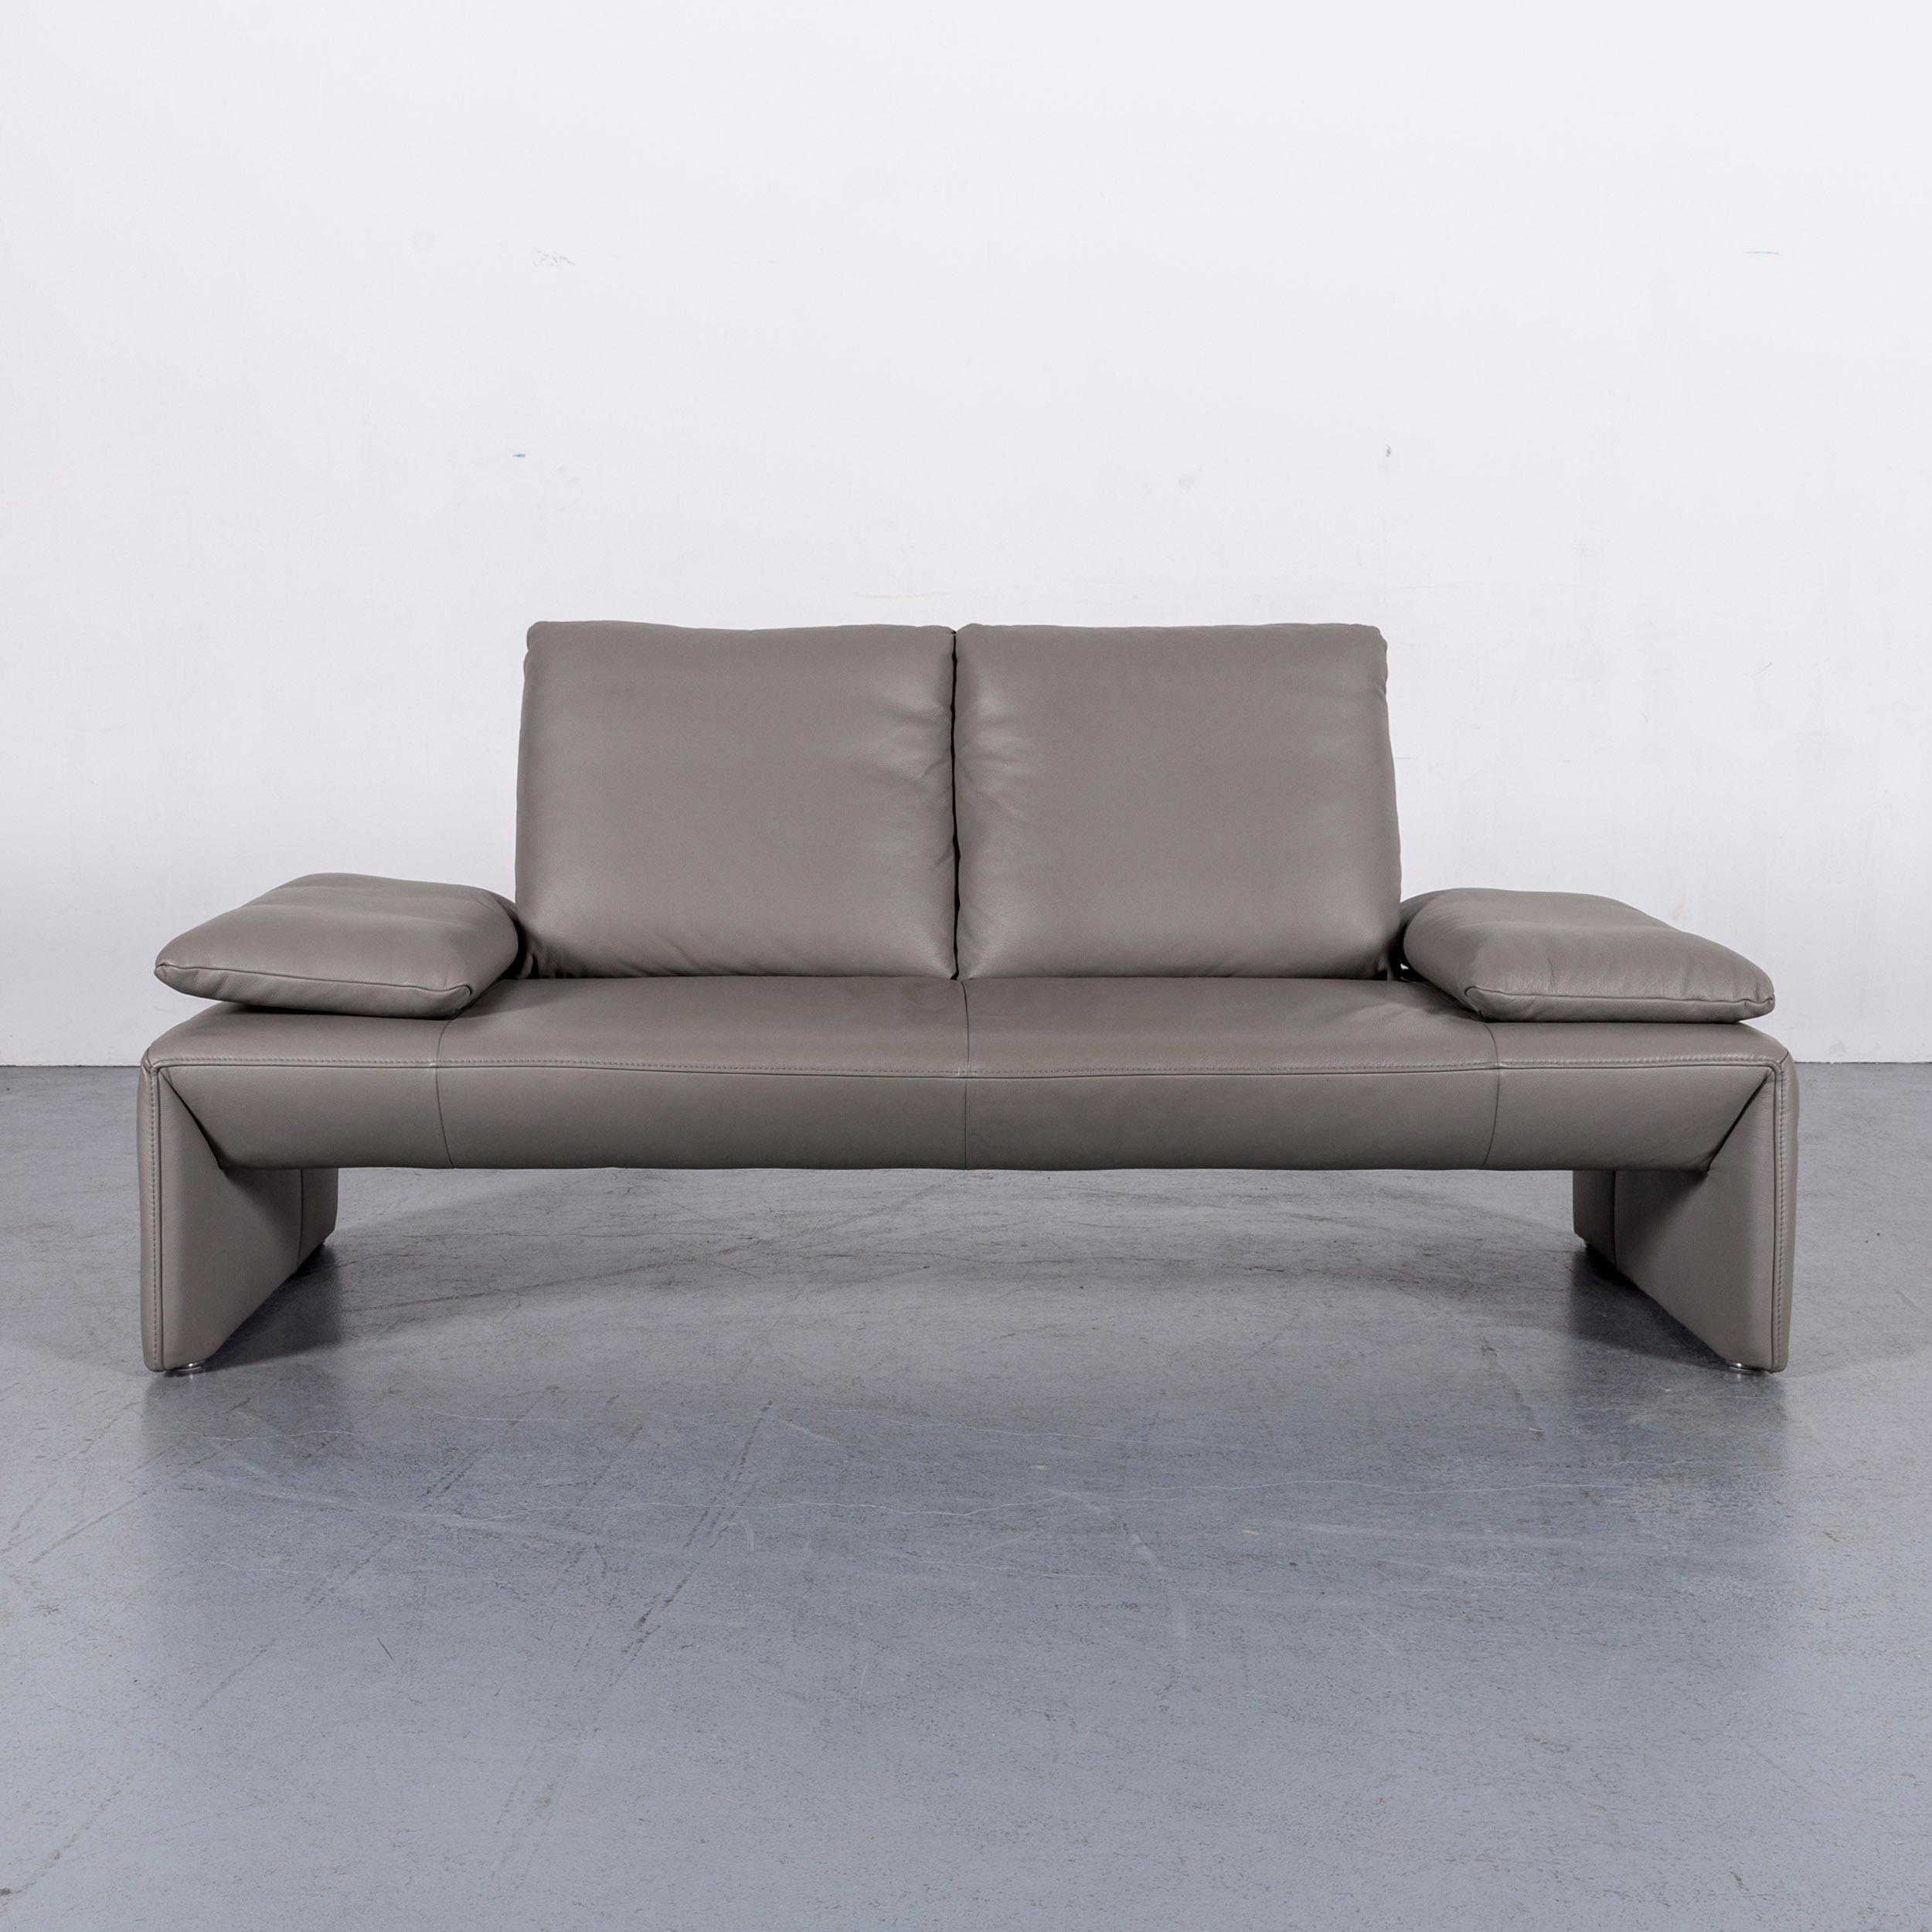 We bring to you a Koinor designer leather sofa grey two-seat couch.